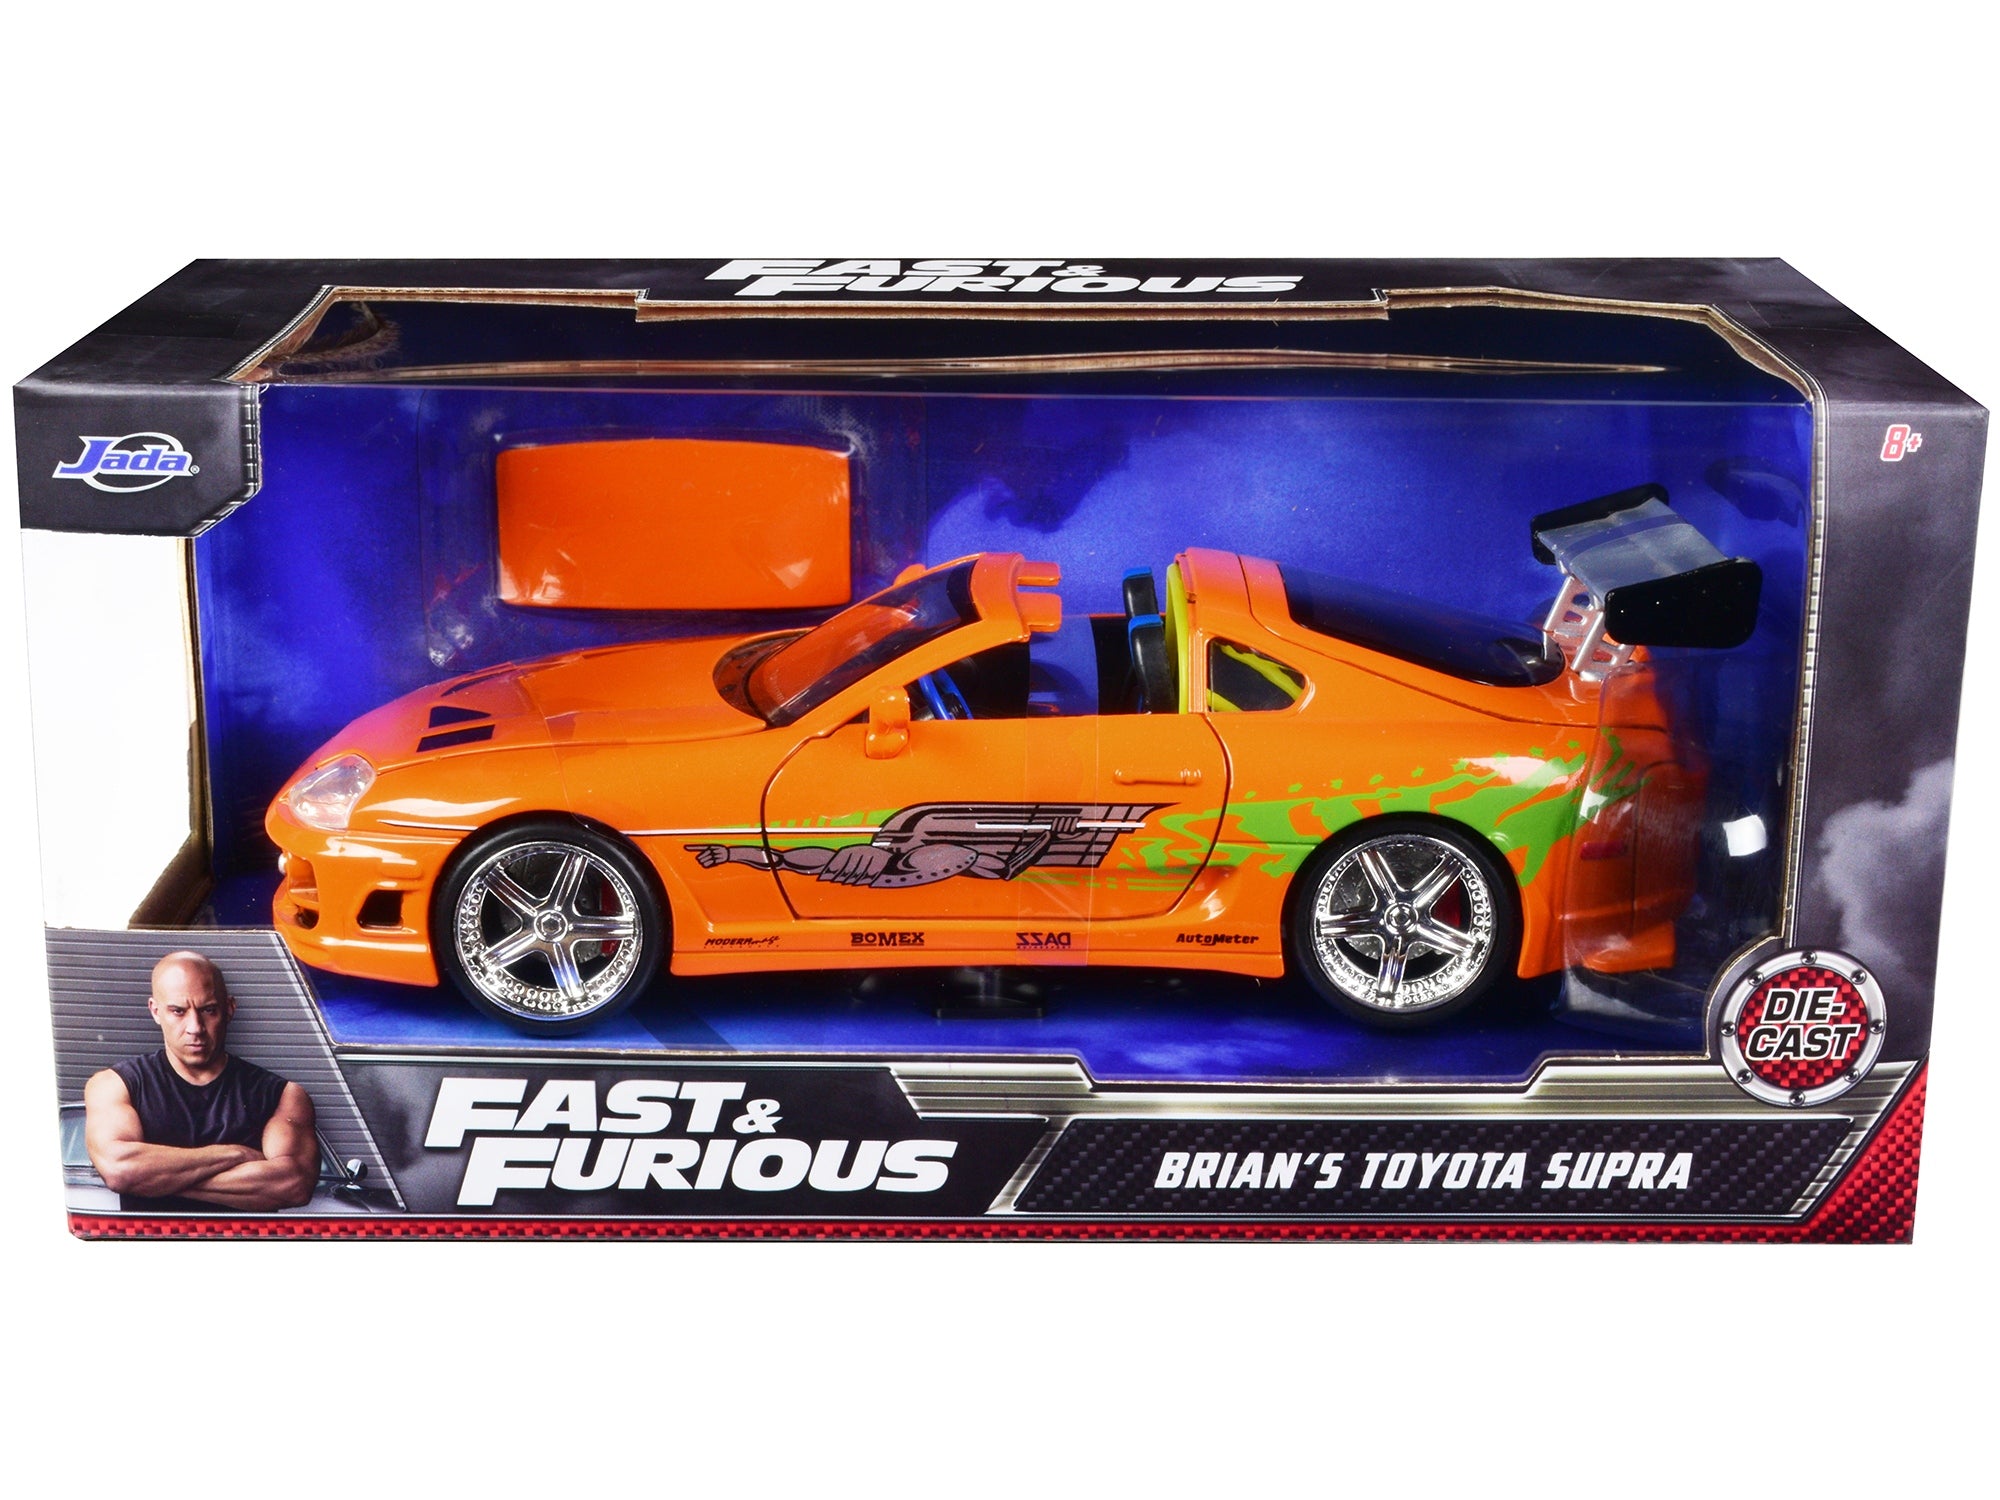 Brian's Toyota Supra Orange with Graphics "Fast & Furious" Movie 1/24 Diecast Model Car by Jada